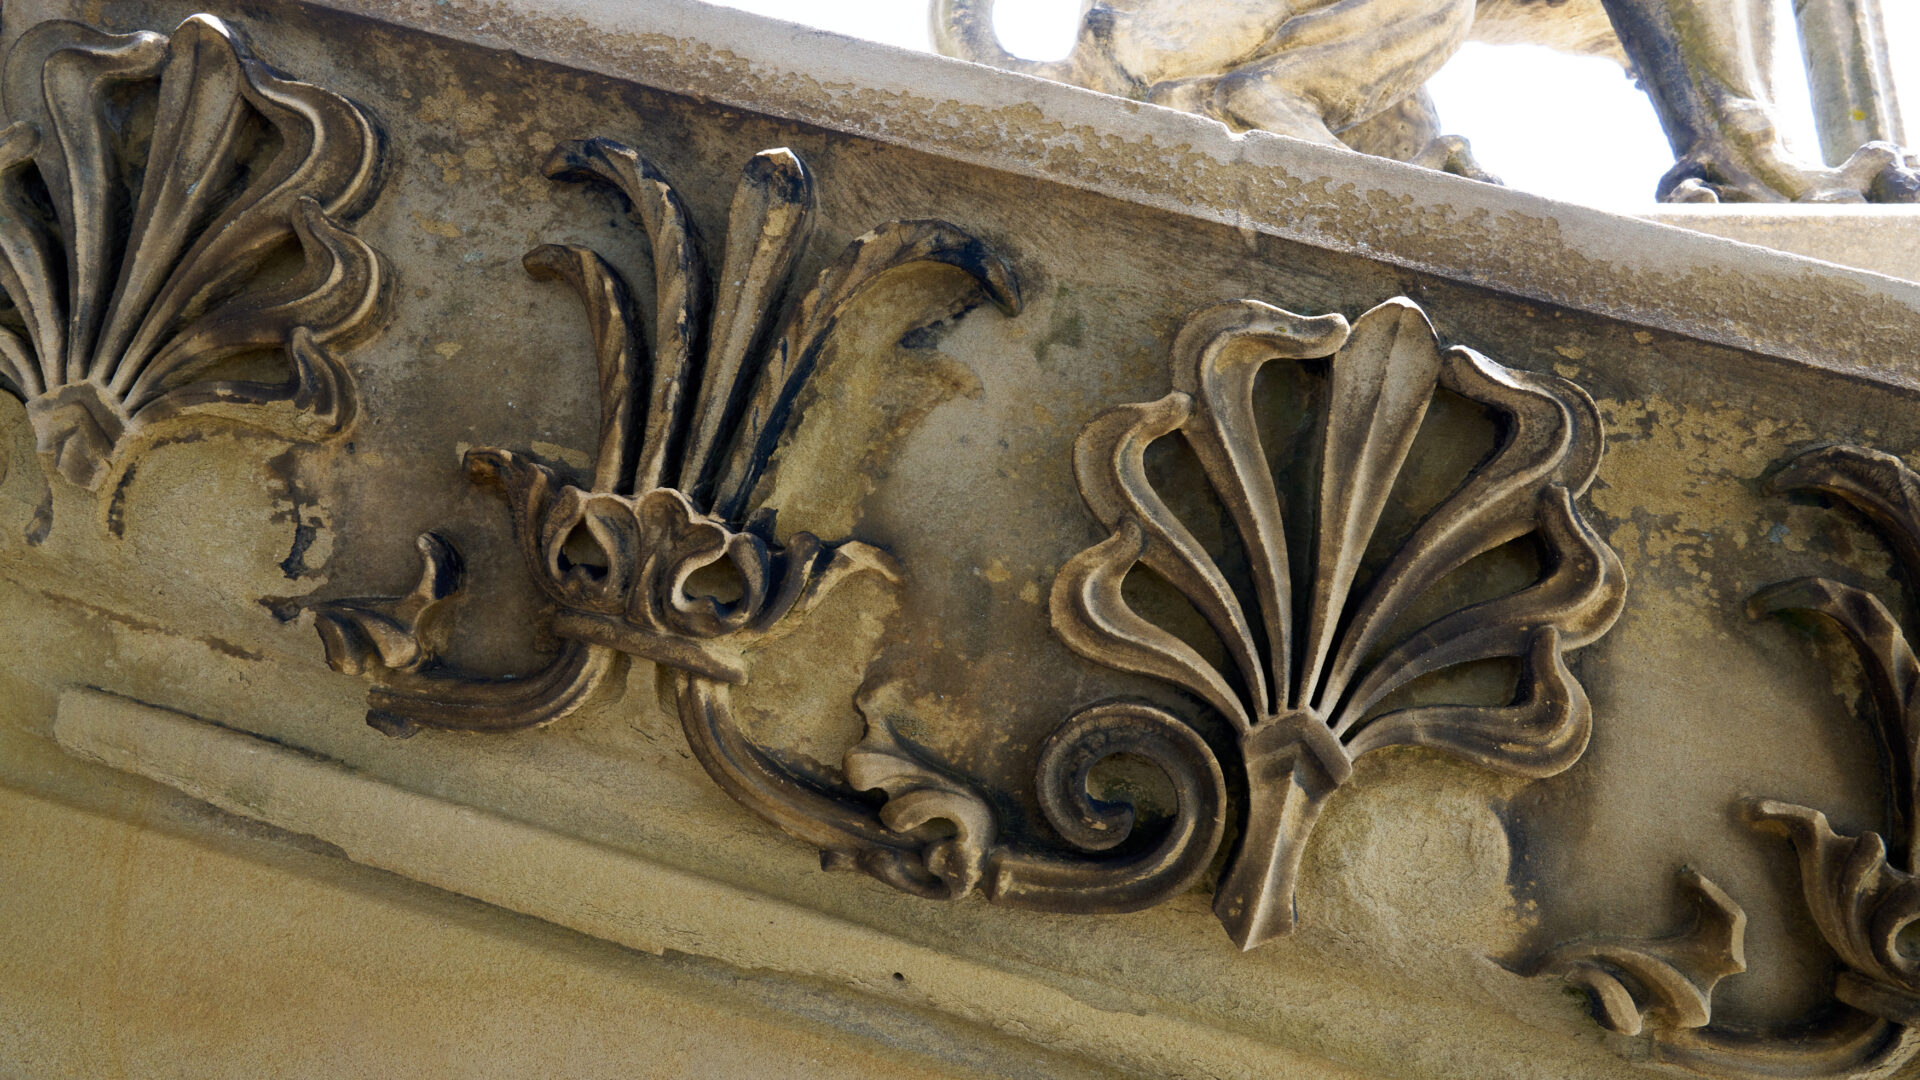 An image of detailing on the pediment.